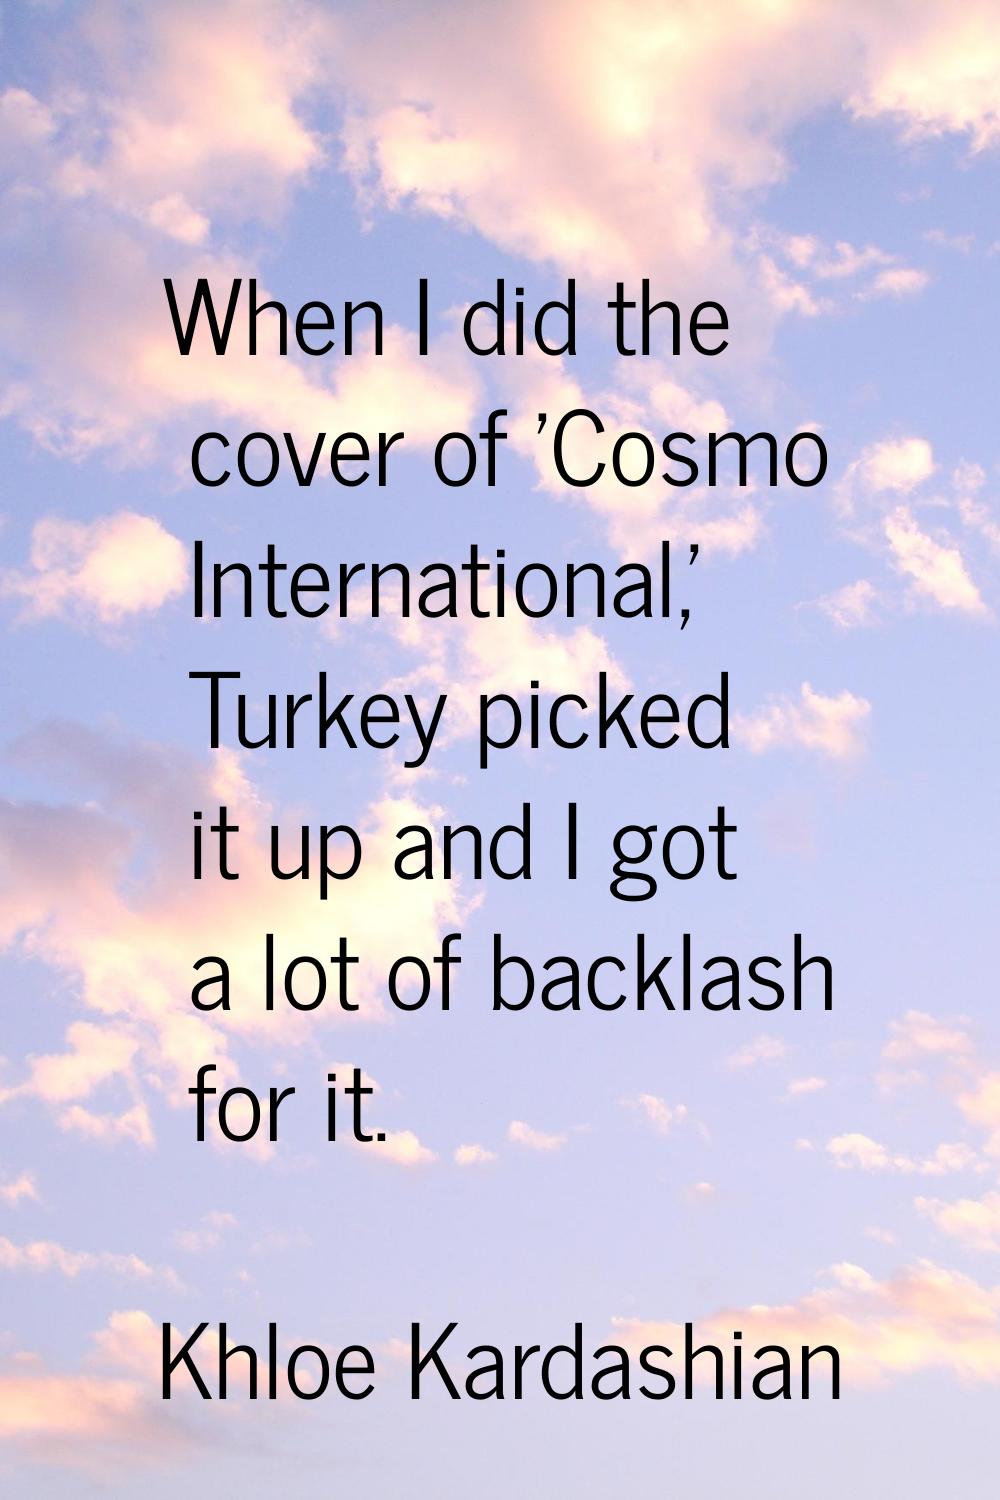 When I did the cover of 'Cosmo International,' Turkey picked it up and I got a lot of backlash for 